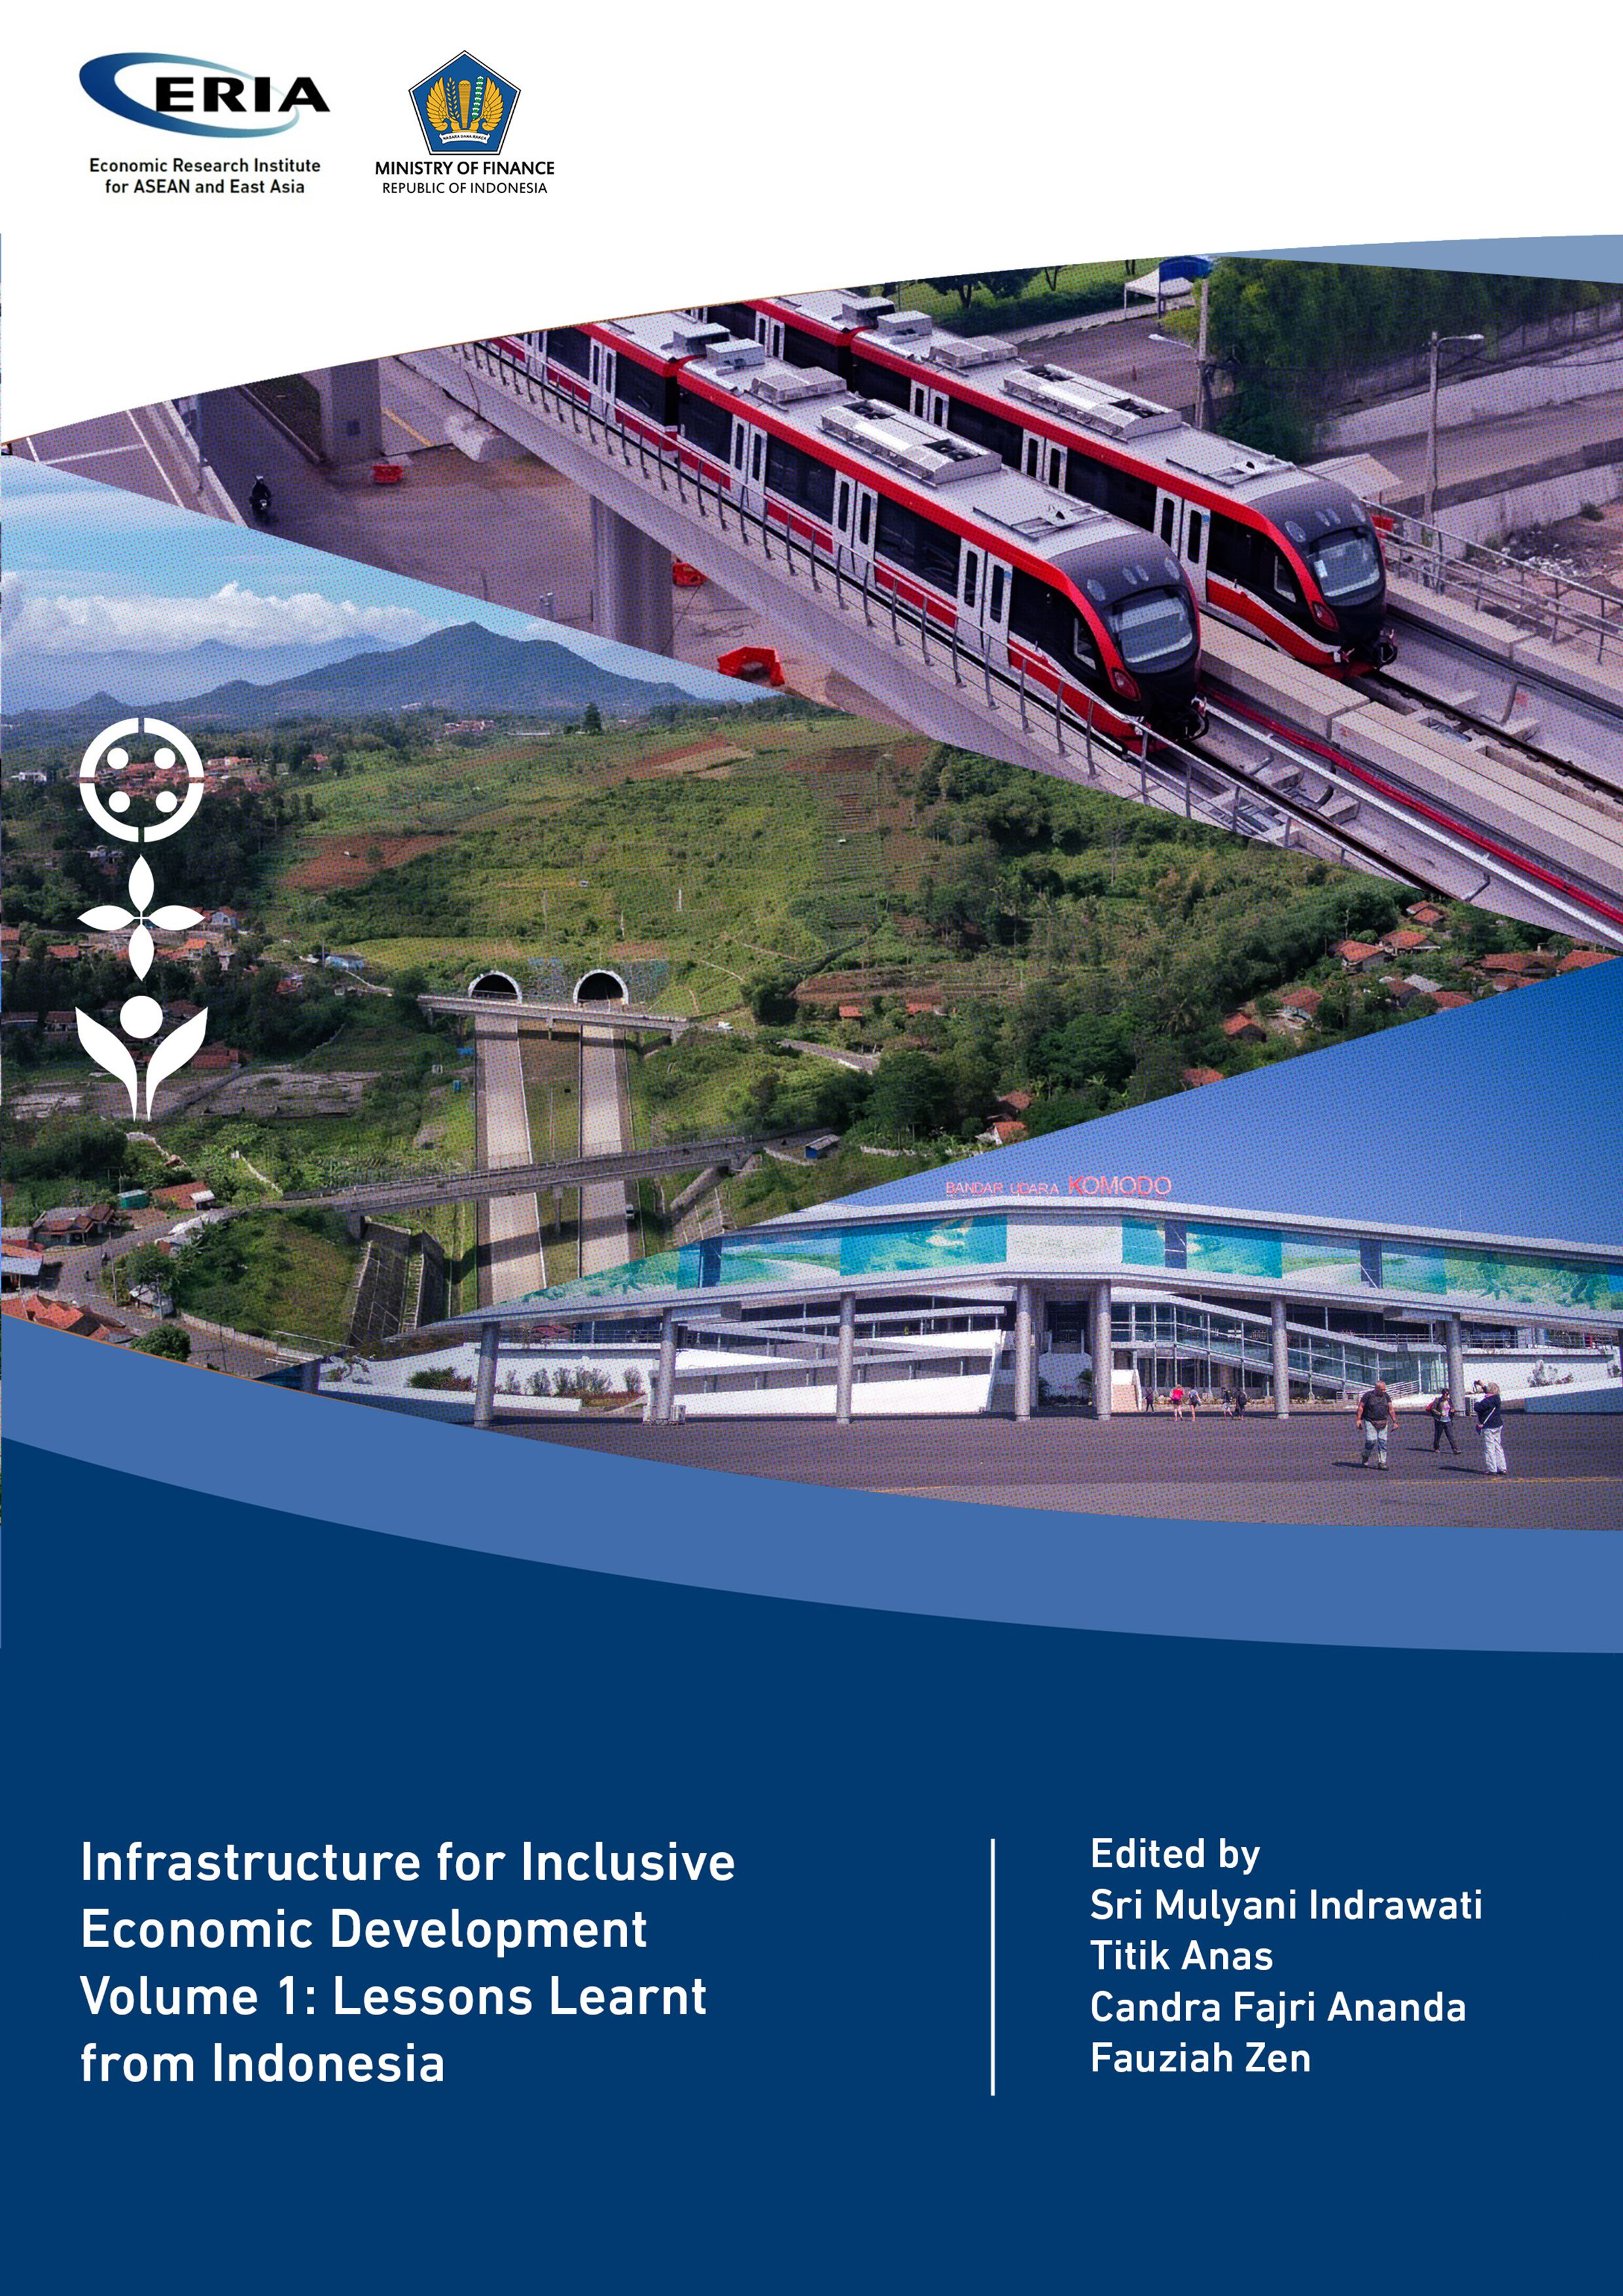 Infrastructure for Inclusive Economic Development Vol.1: Lessons Learnt from Indonesia